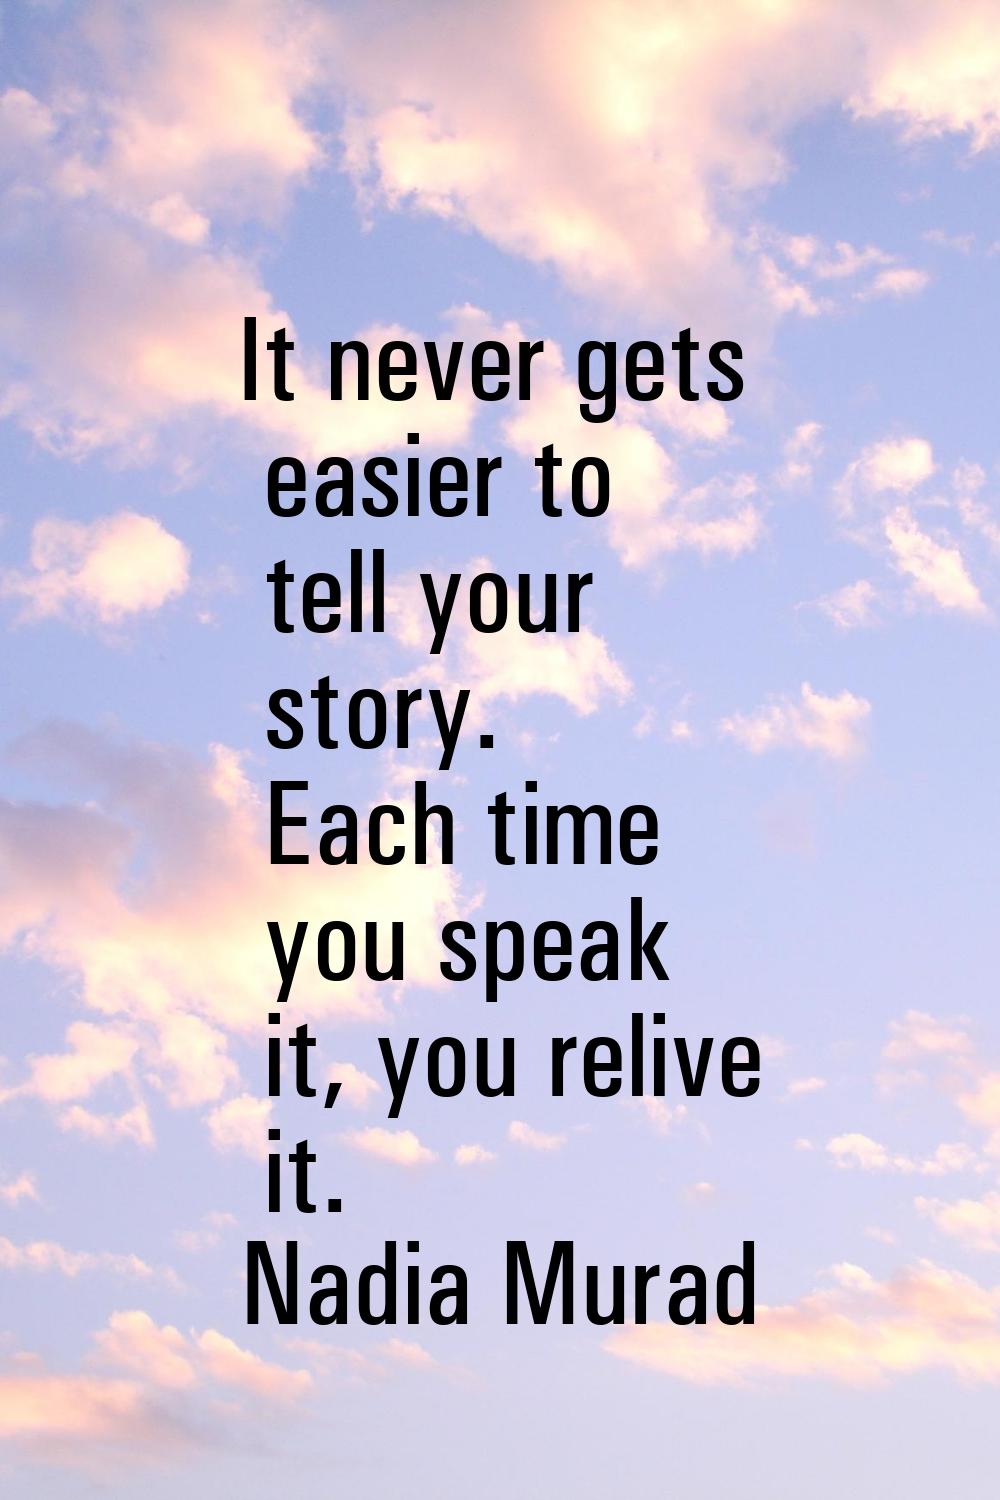 It never gets easier to tell your story. Each time you speak it, you relive it.